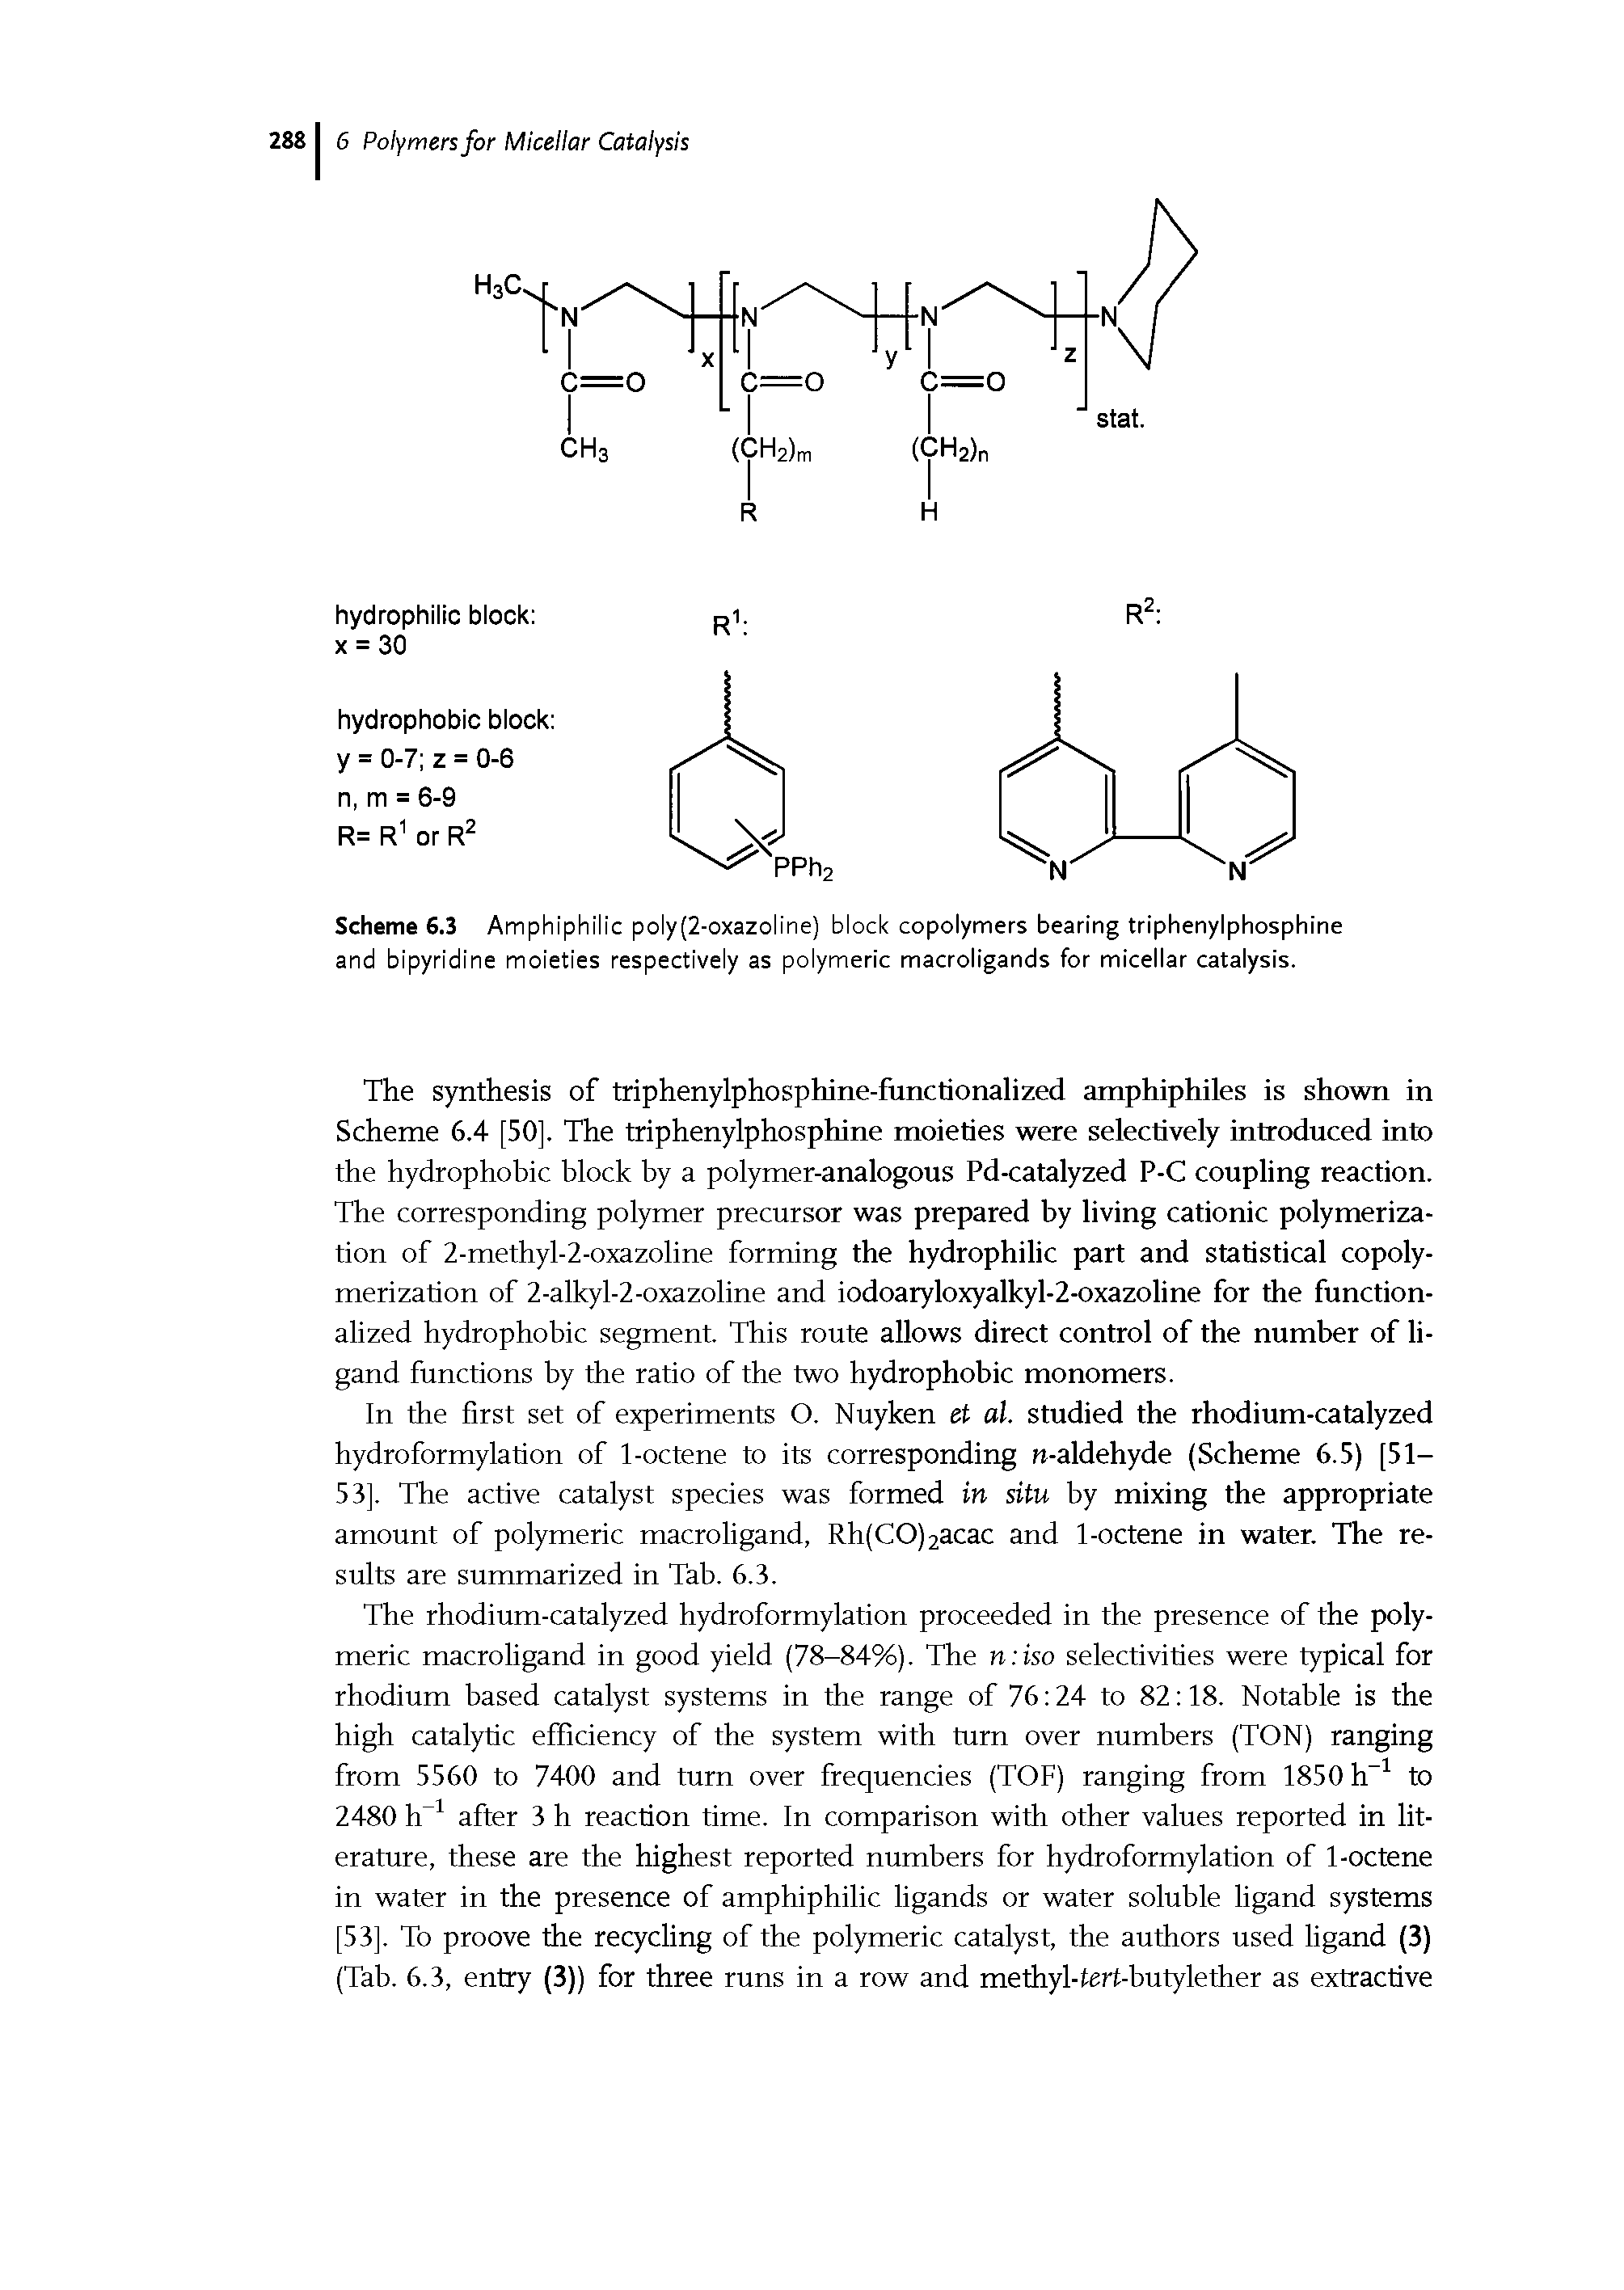 Scheme 6.3 Amphiphilic poly(2-oxazoline) block copolymers bearing triphenylphosphine and bipyridine moieties respectively as polymeric macroligands for micellar catalysis.